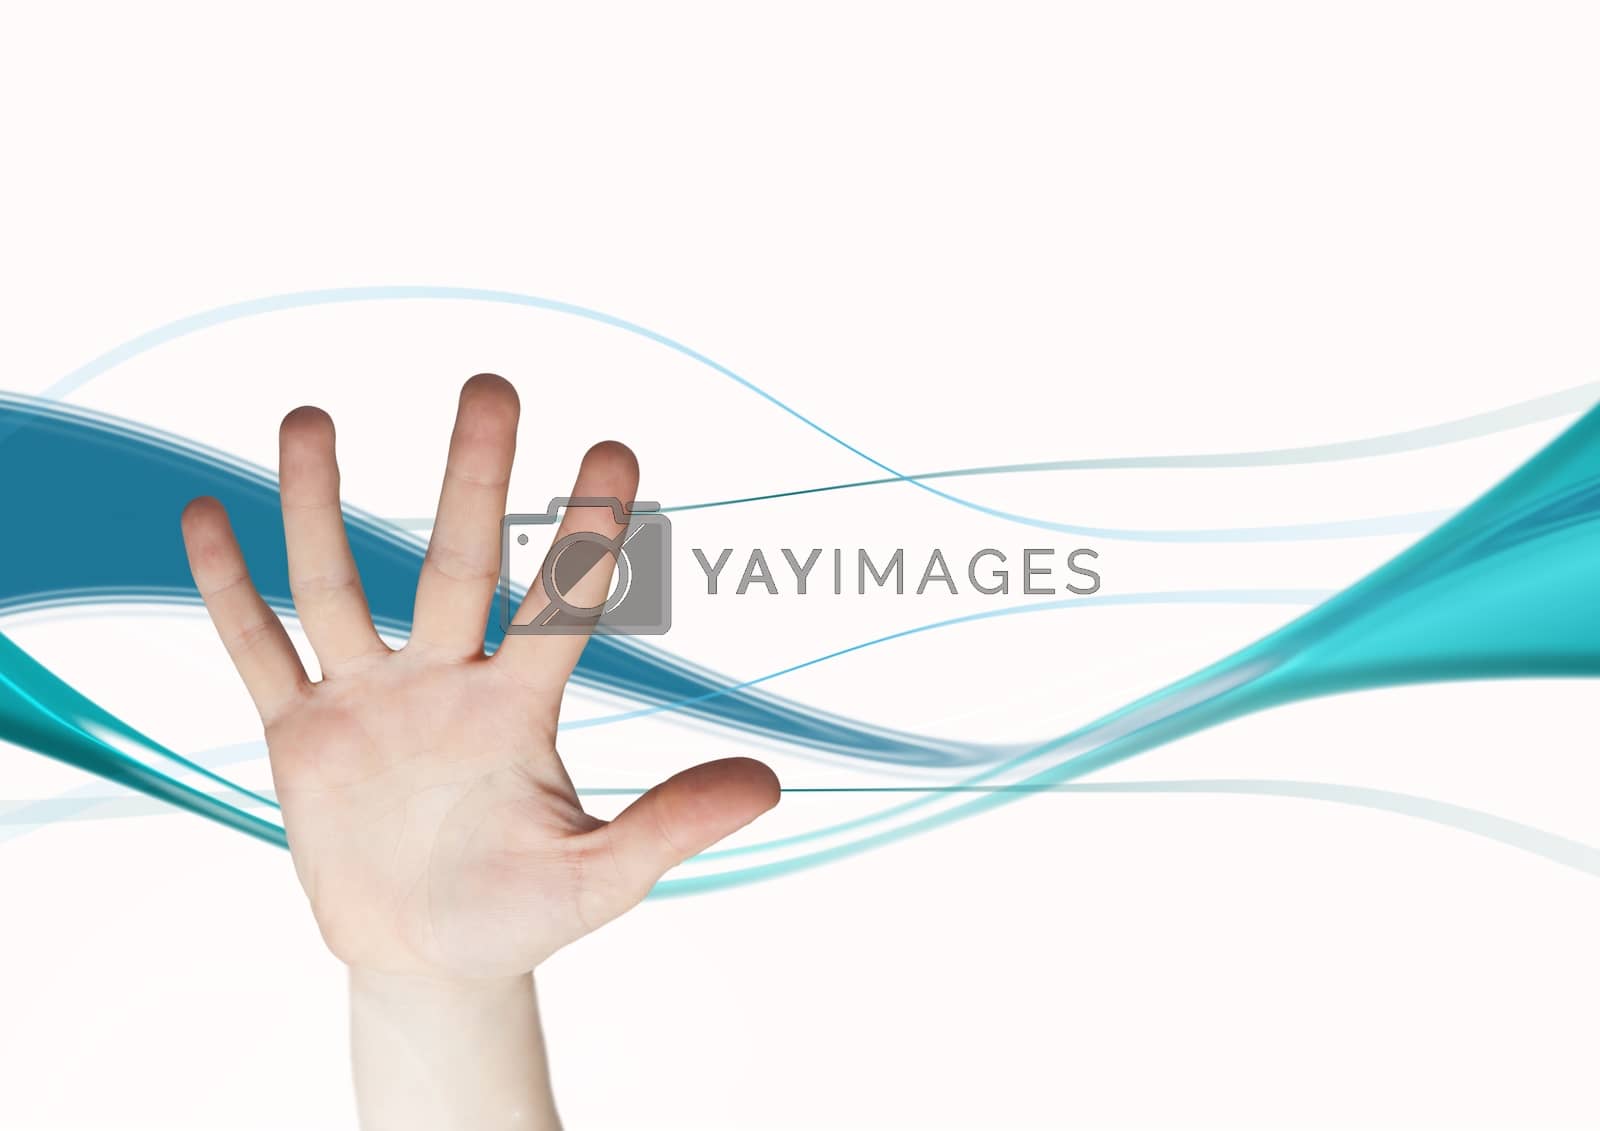 Royalty free image of Composite image of open hand against blue curves by Wavebreakmedia